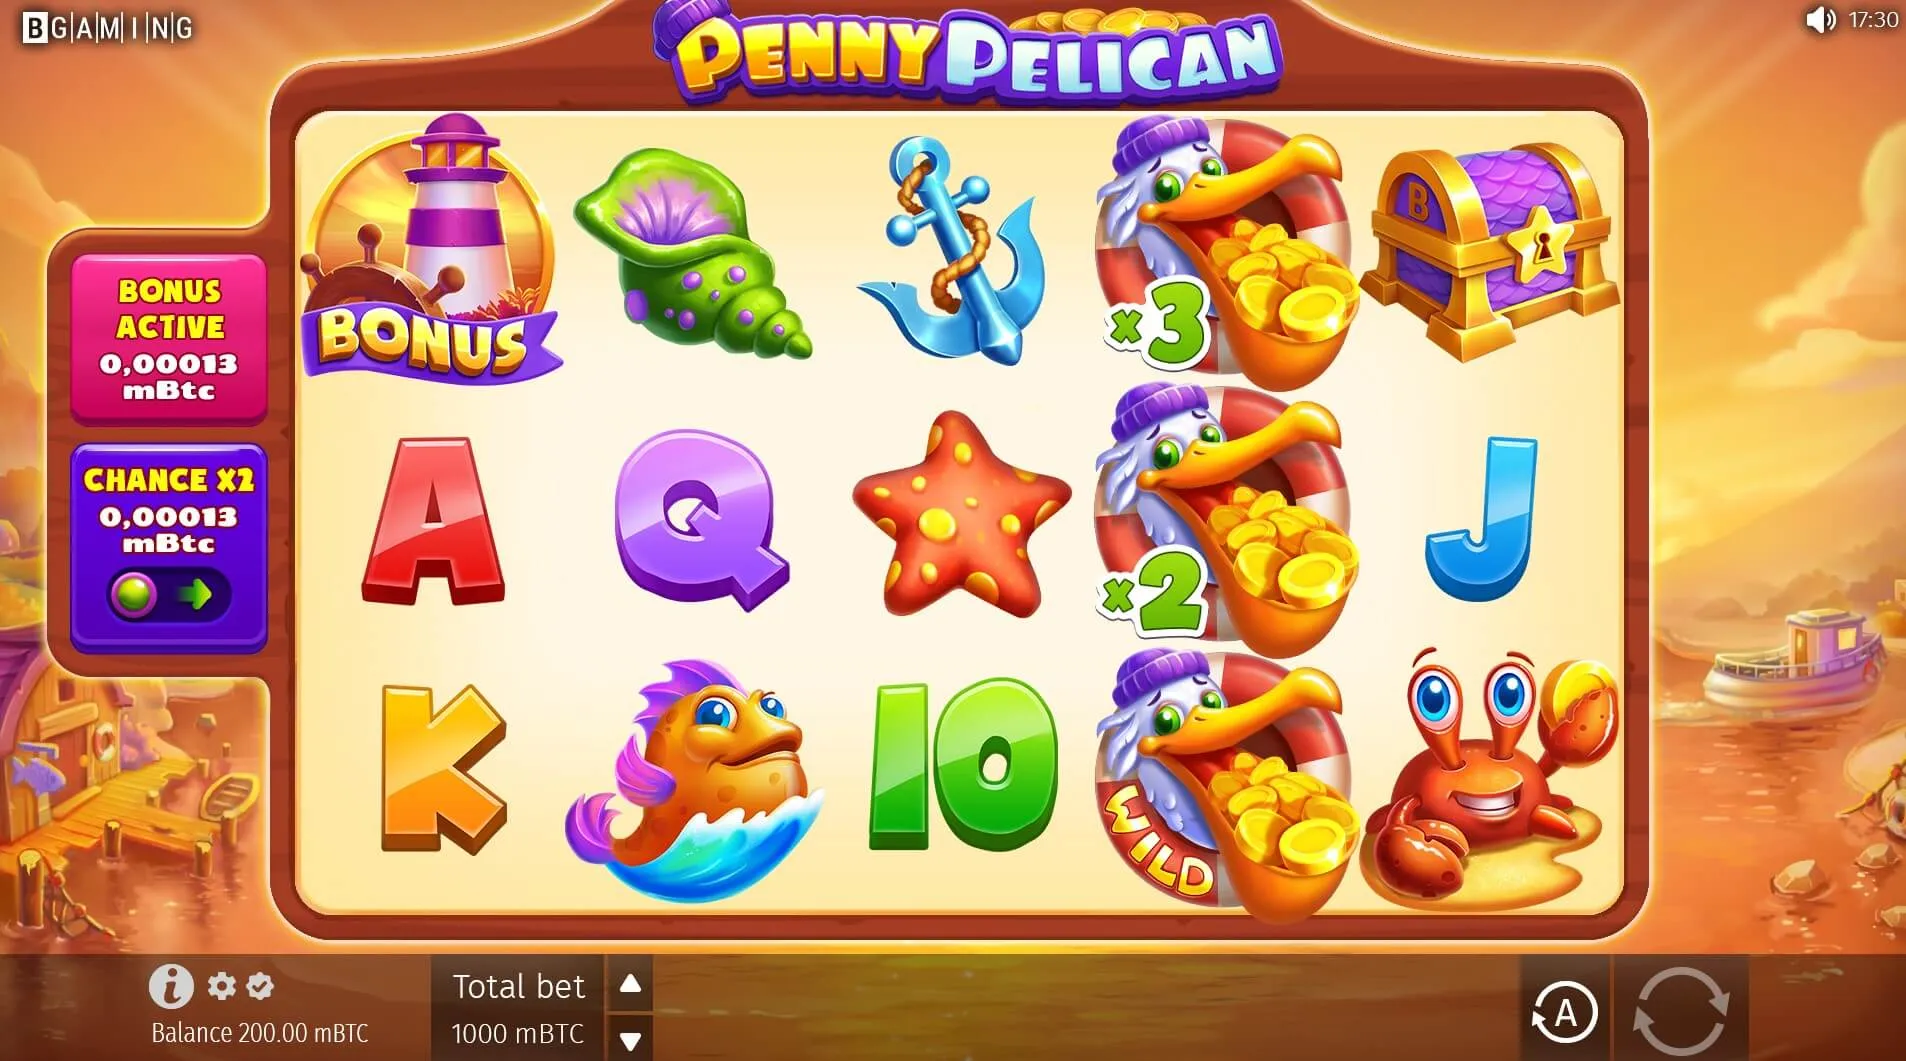 Penny Pelican Slot Free Spins